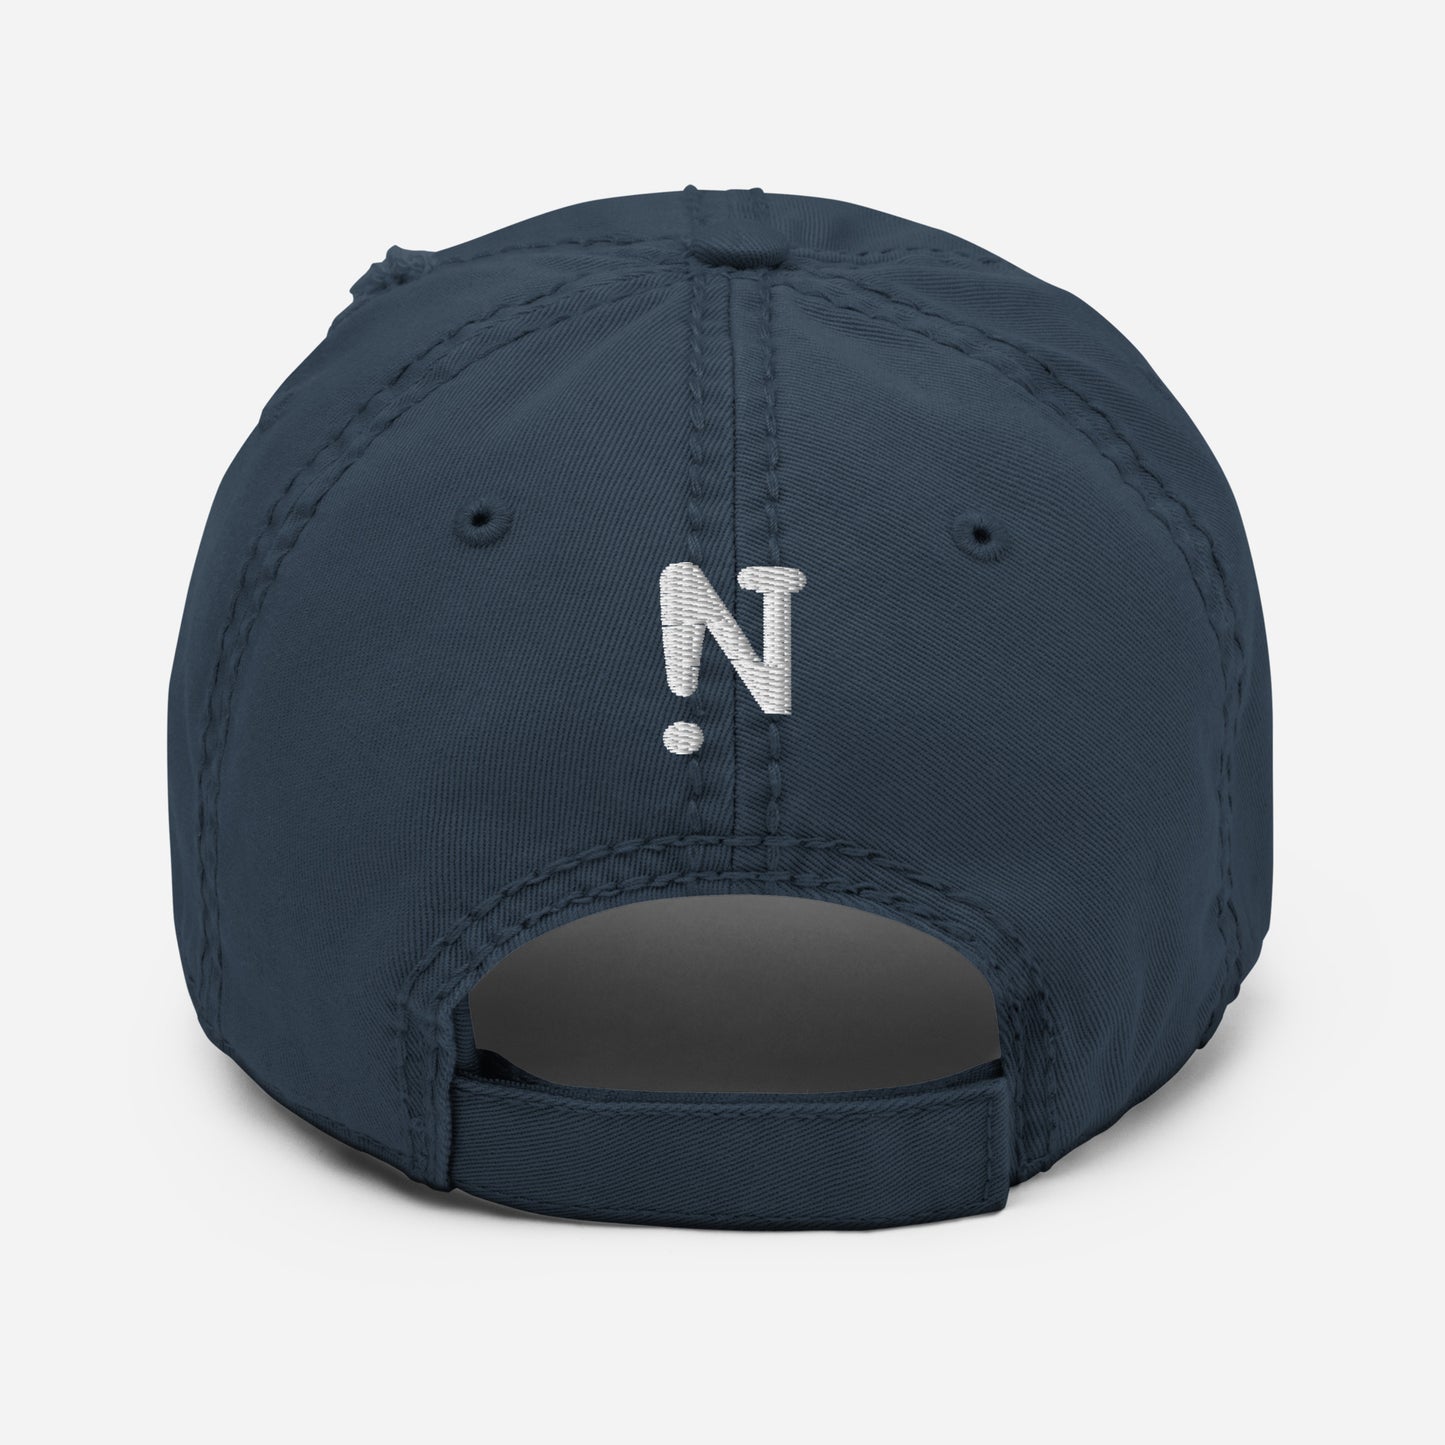 !N Cut Out USA Distressed Dad Hat